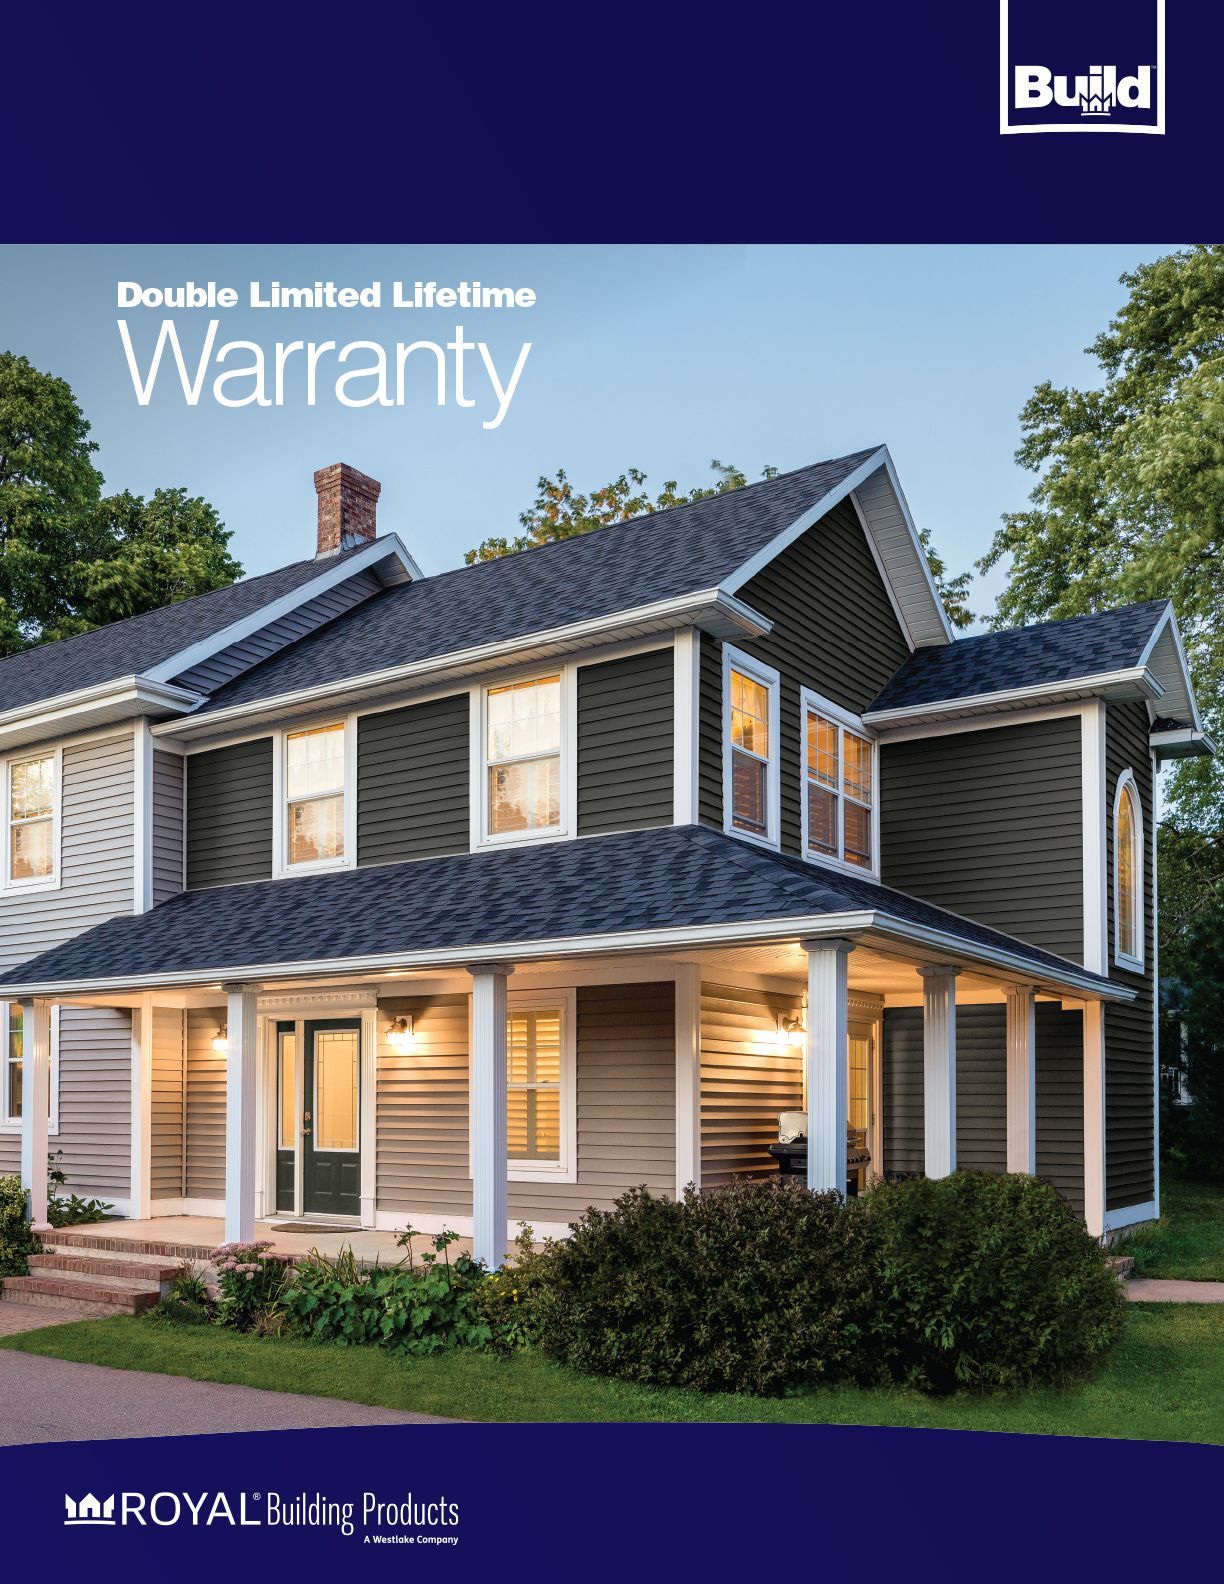 Royal Building Products Warranty